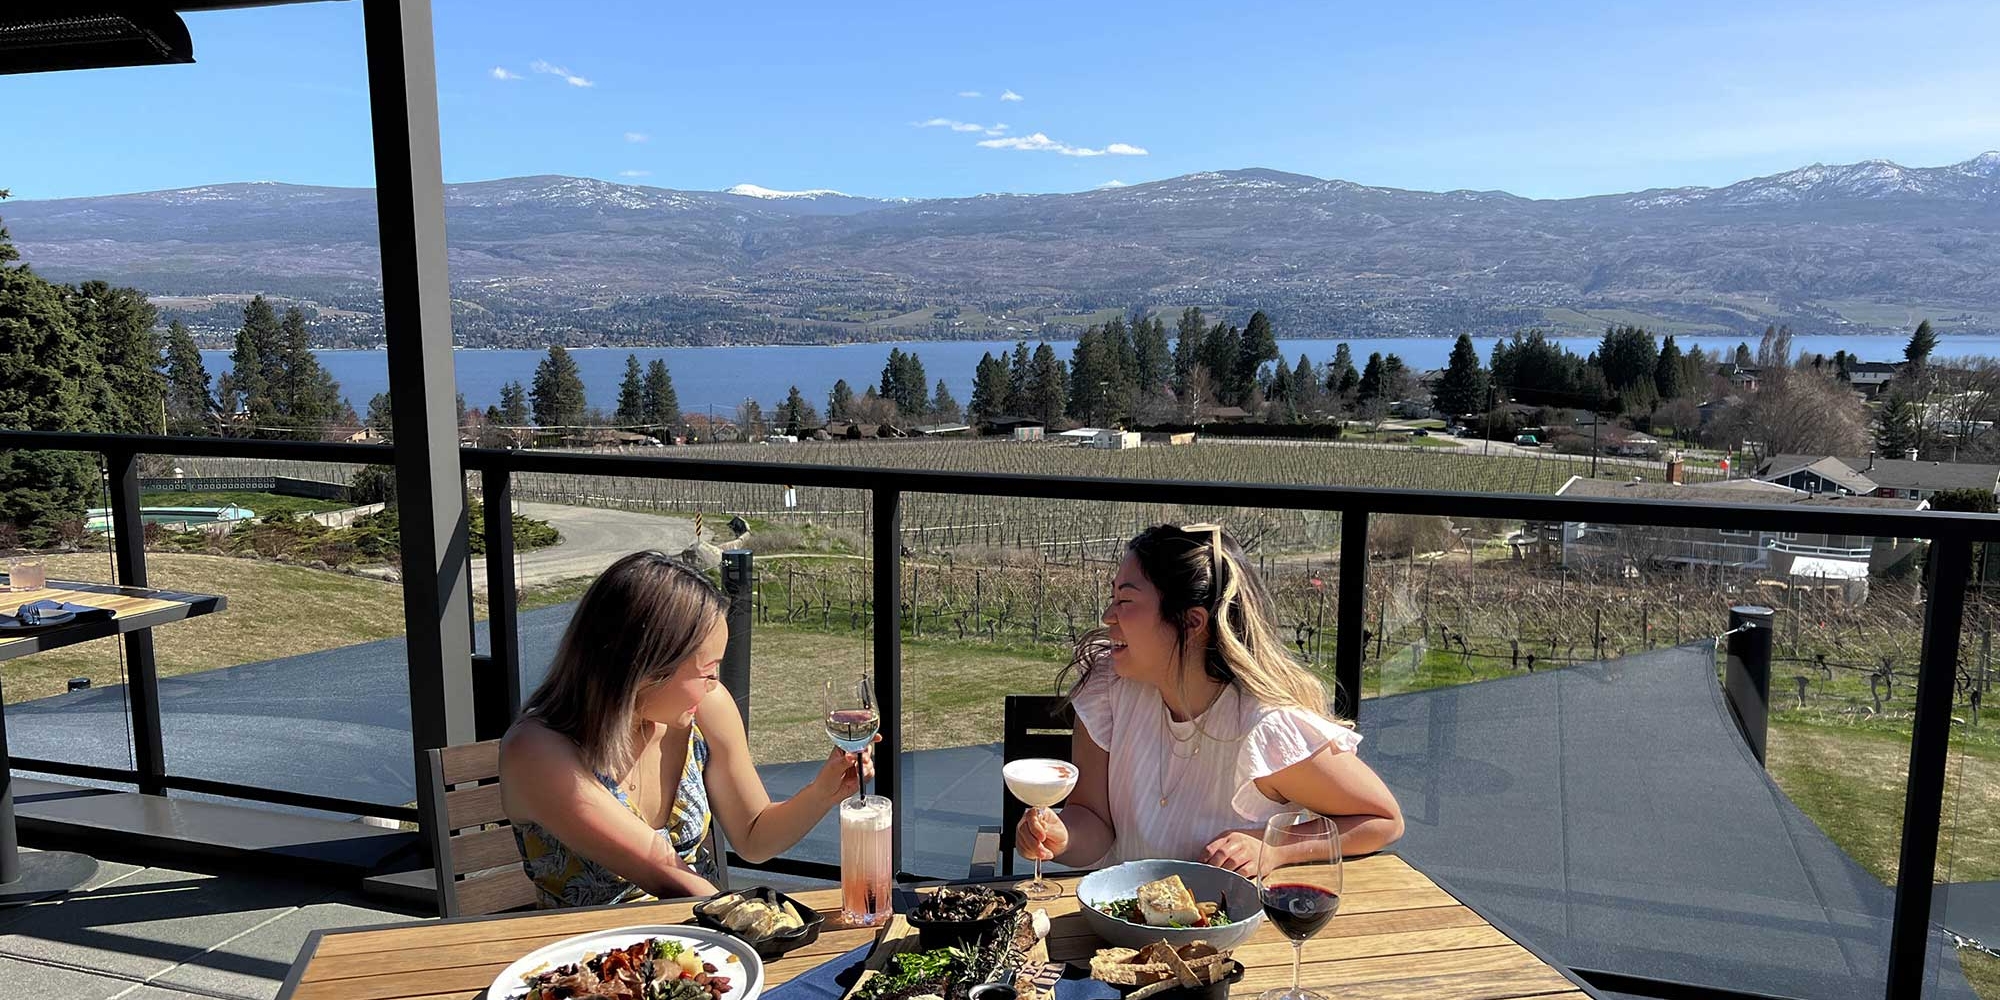 Emma Choo and Priscilla Banh sit at a table on a patio on a sunny day. There are several dishes of food on the wooden table and views of the lake behind them.